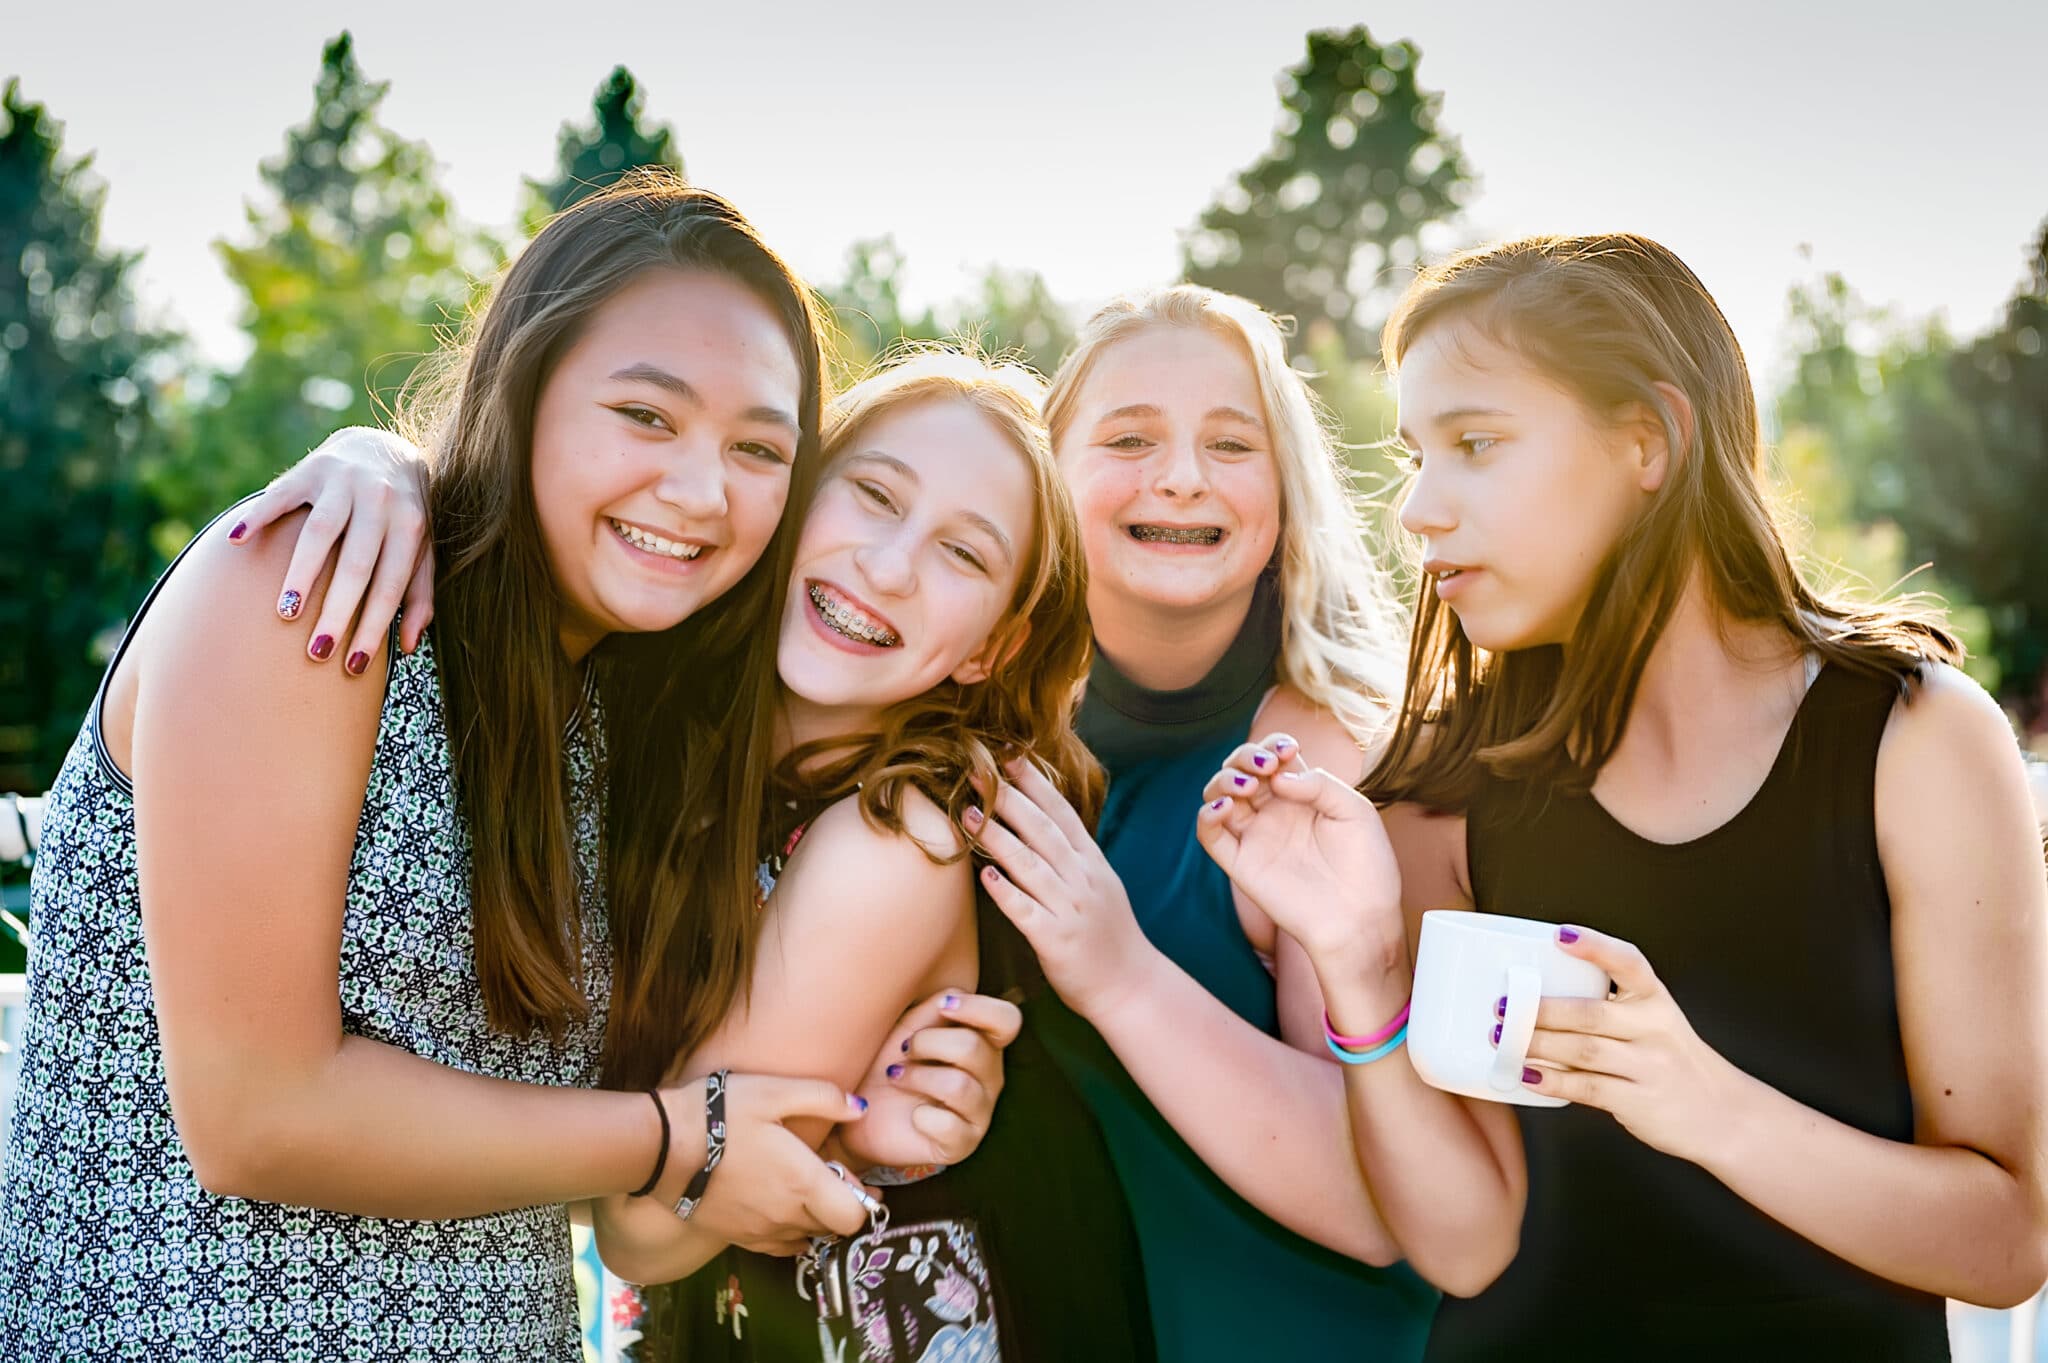 Four young girls backlit by the sun hug each other during the bat mitzvah.